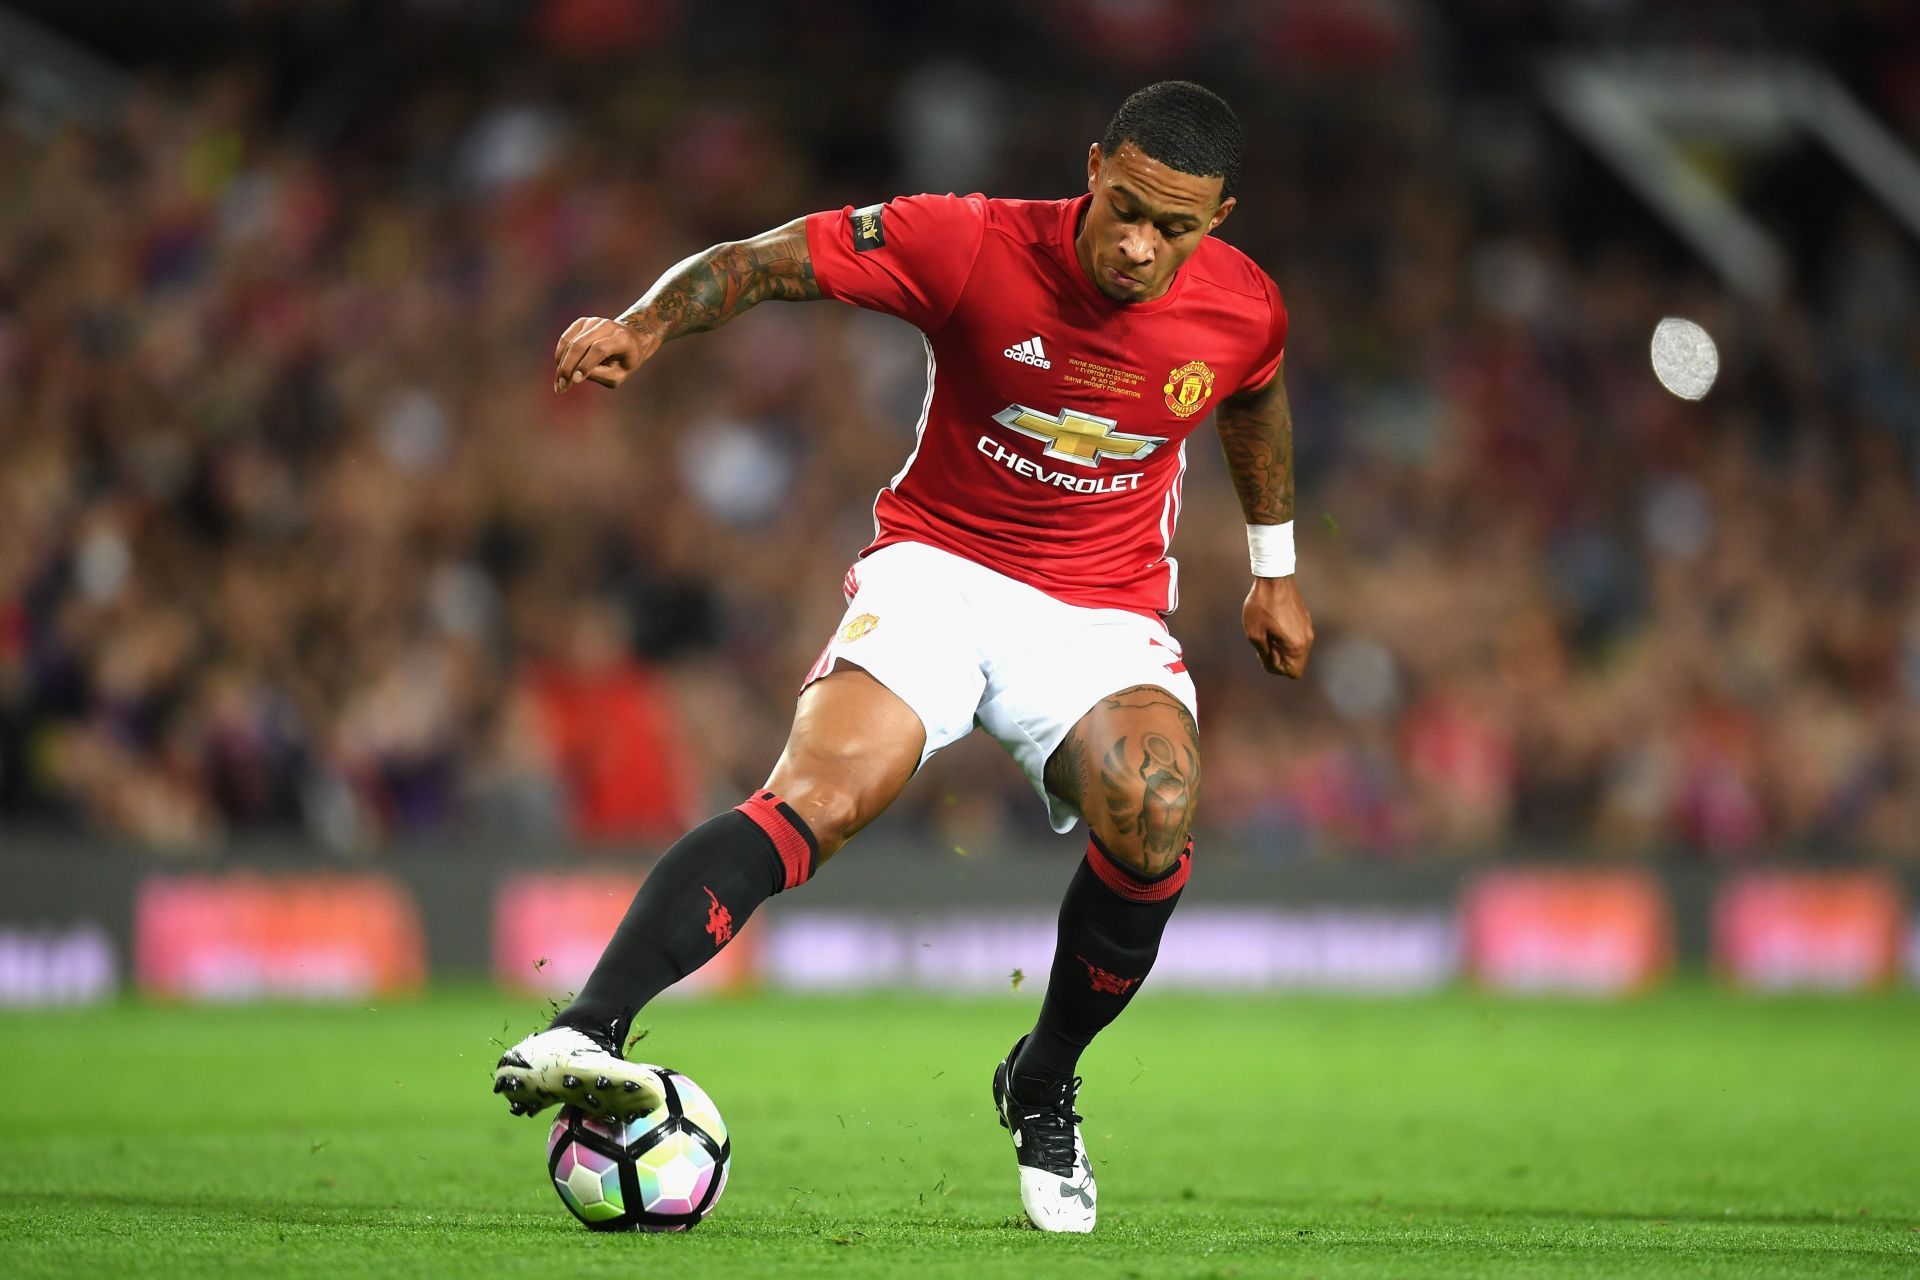 Depay played for Manchester United between 2015-2017.